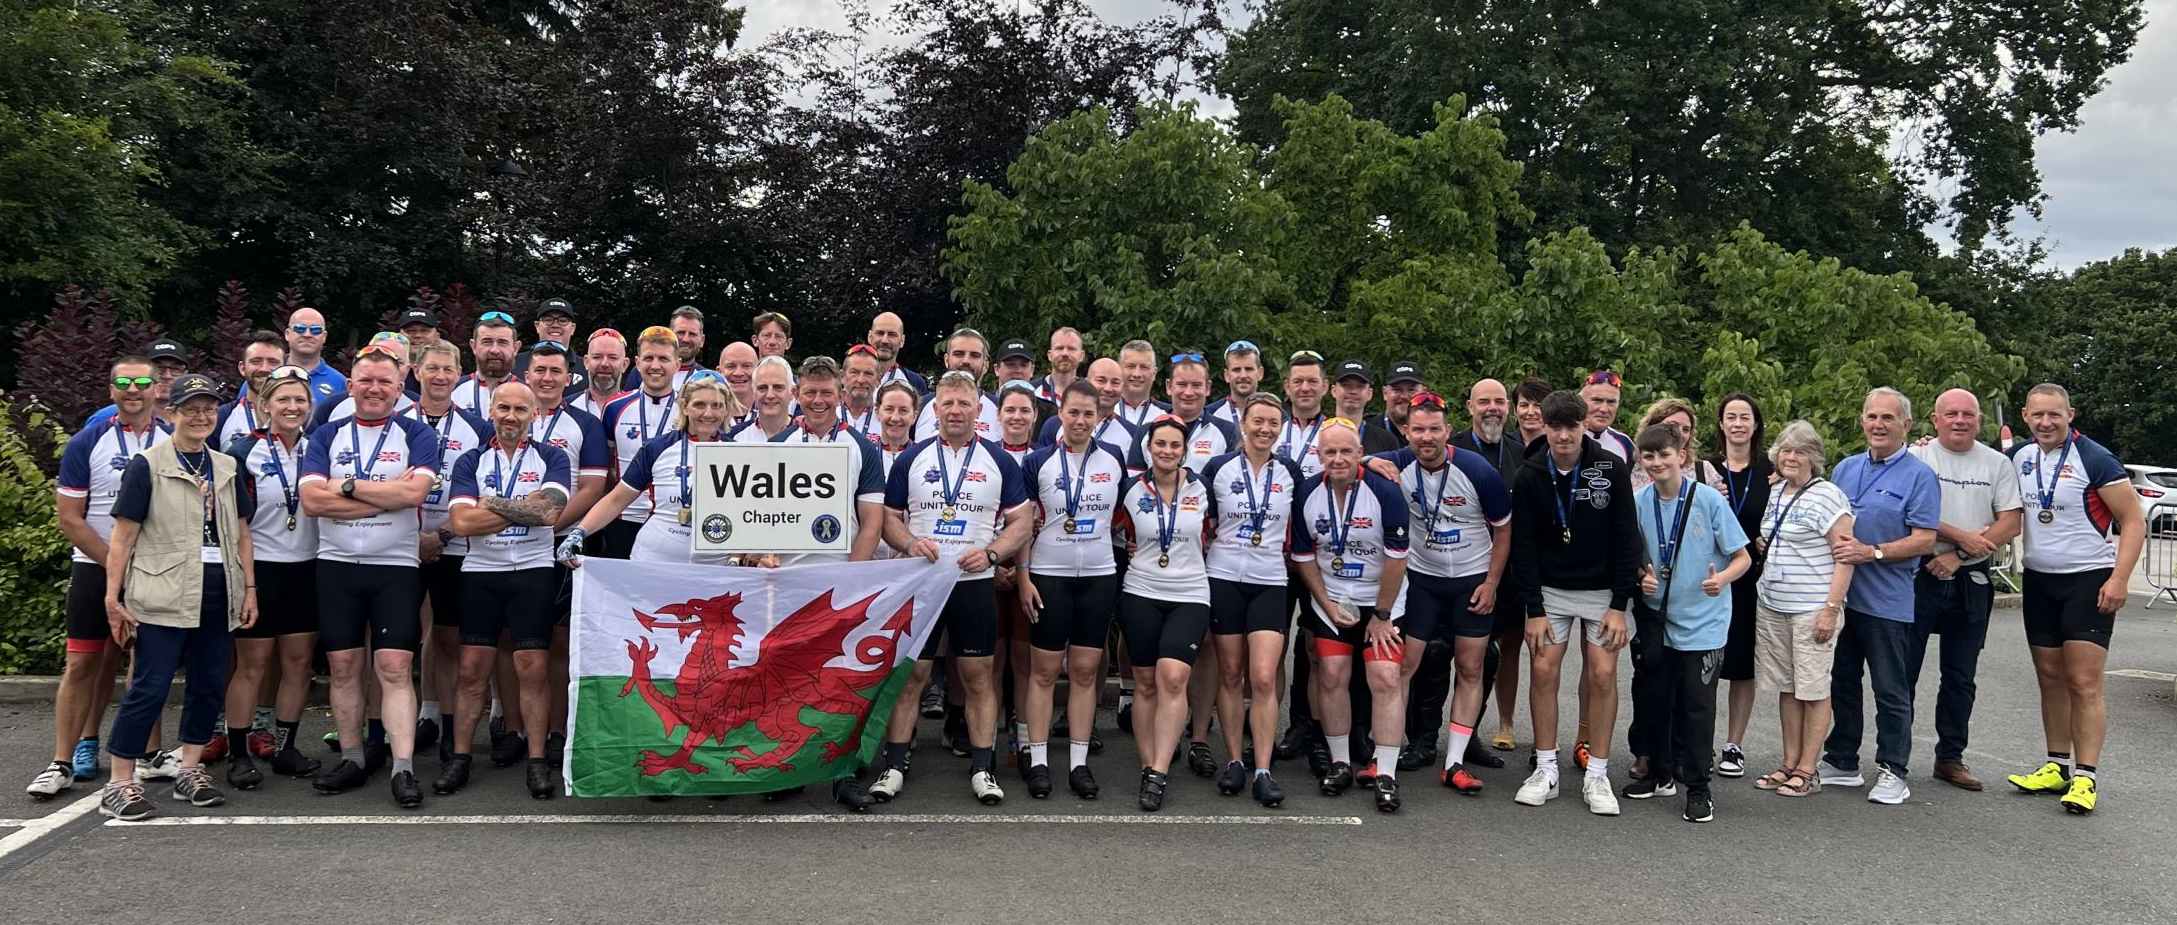 The Welsh chapter of the Police Unity Tour.